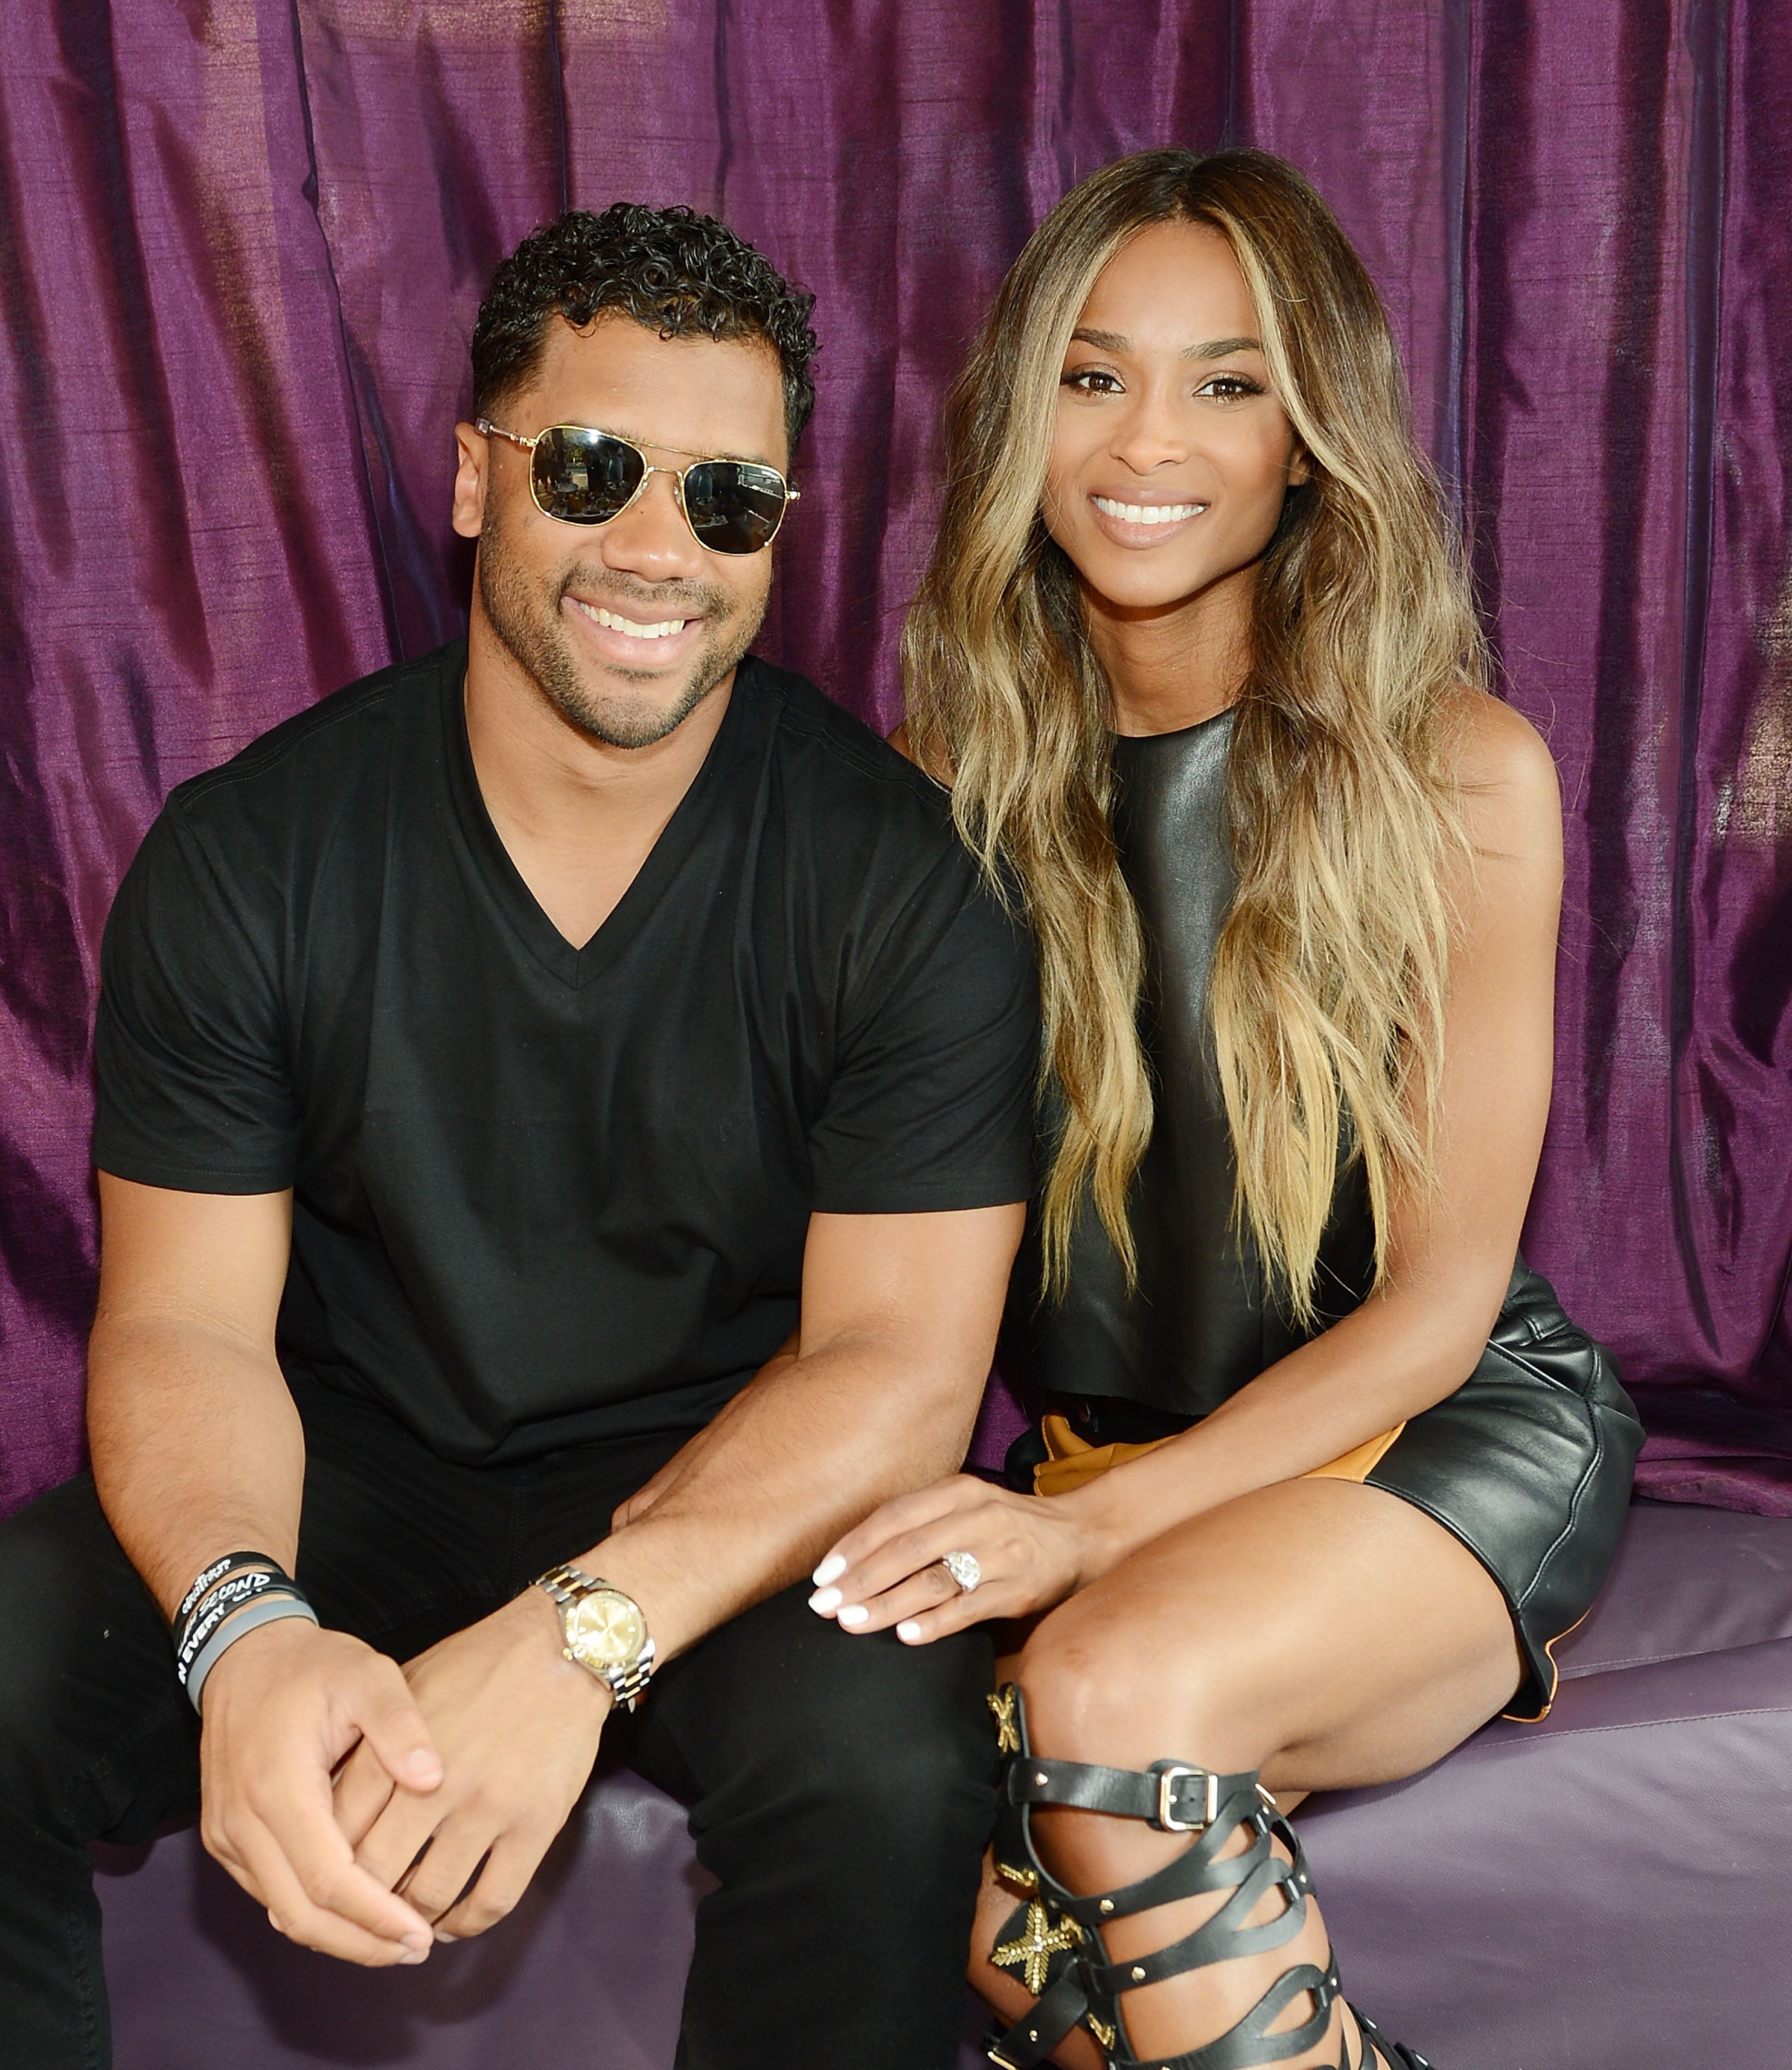 Ciara, Russell Wilson, Tia Mowry and More!
